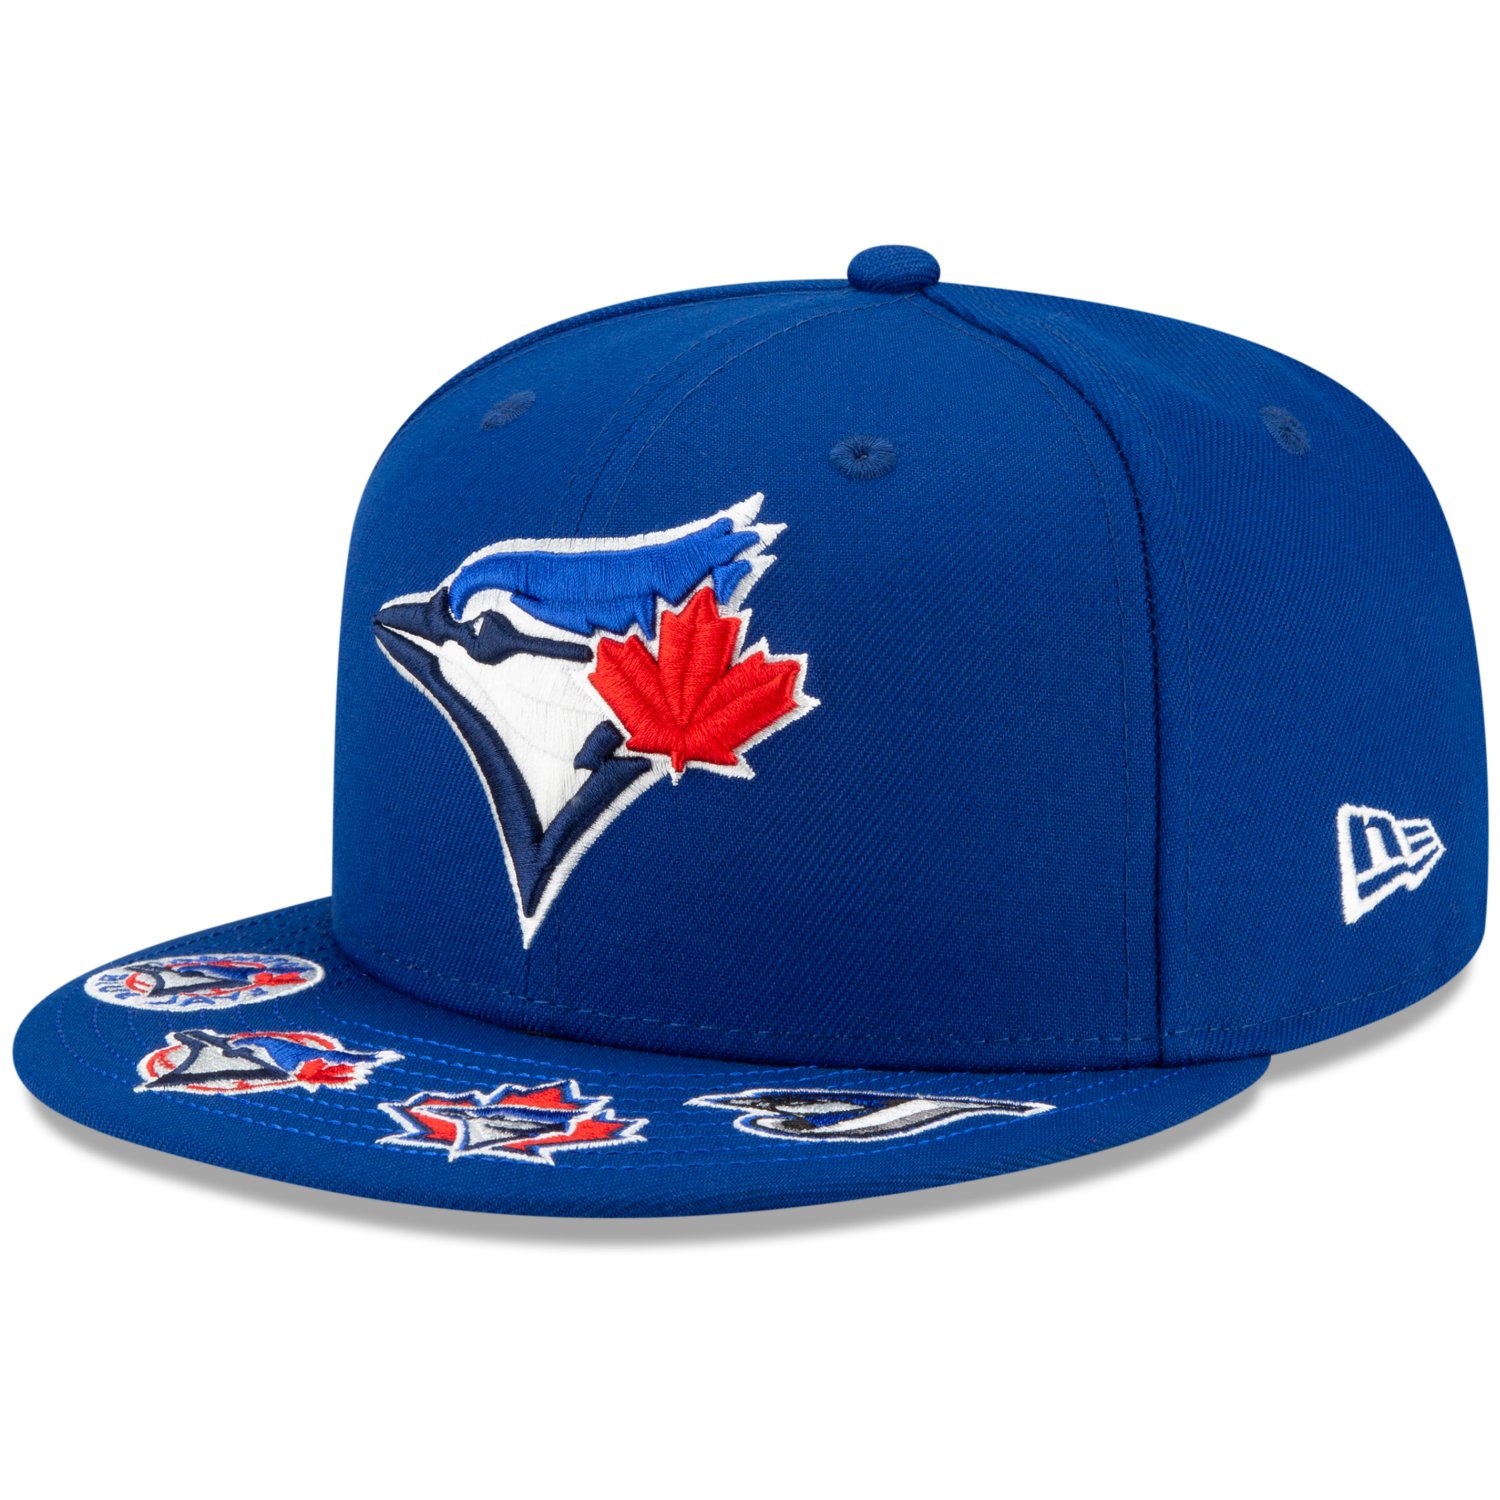 New Era 59Fifty Fitted Cap - GRAPHIC VISOR Toronto Blue Jays | Fitted ...